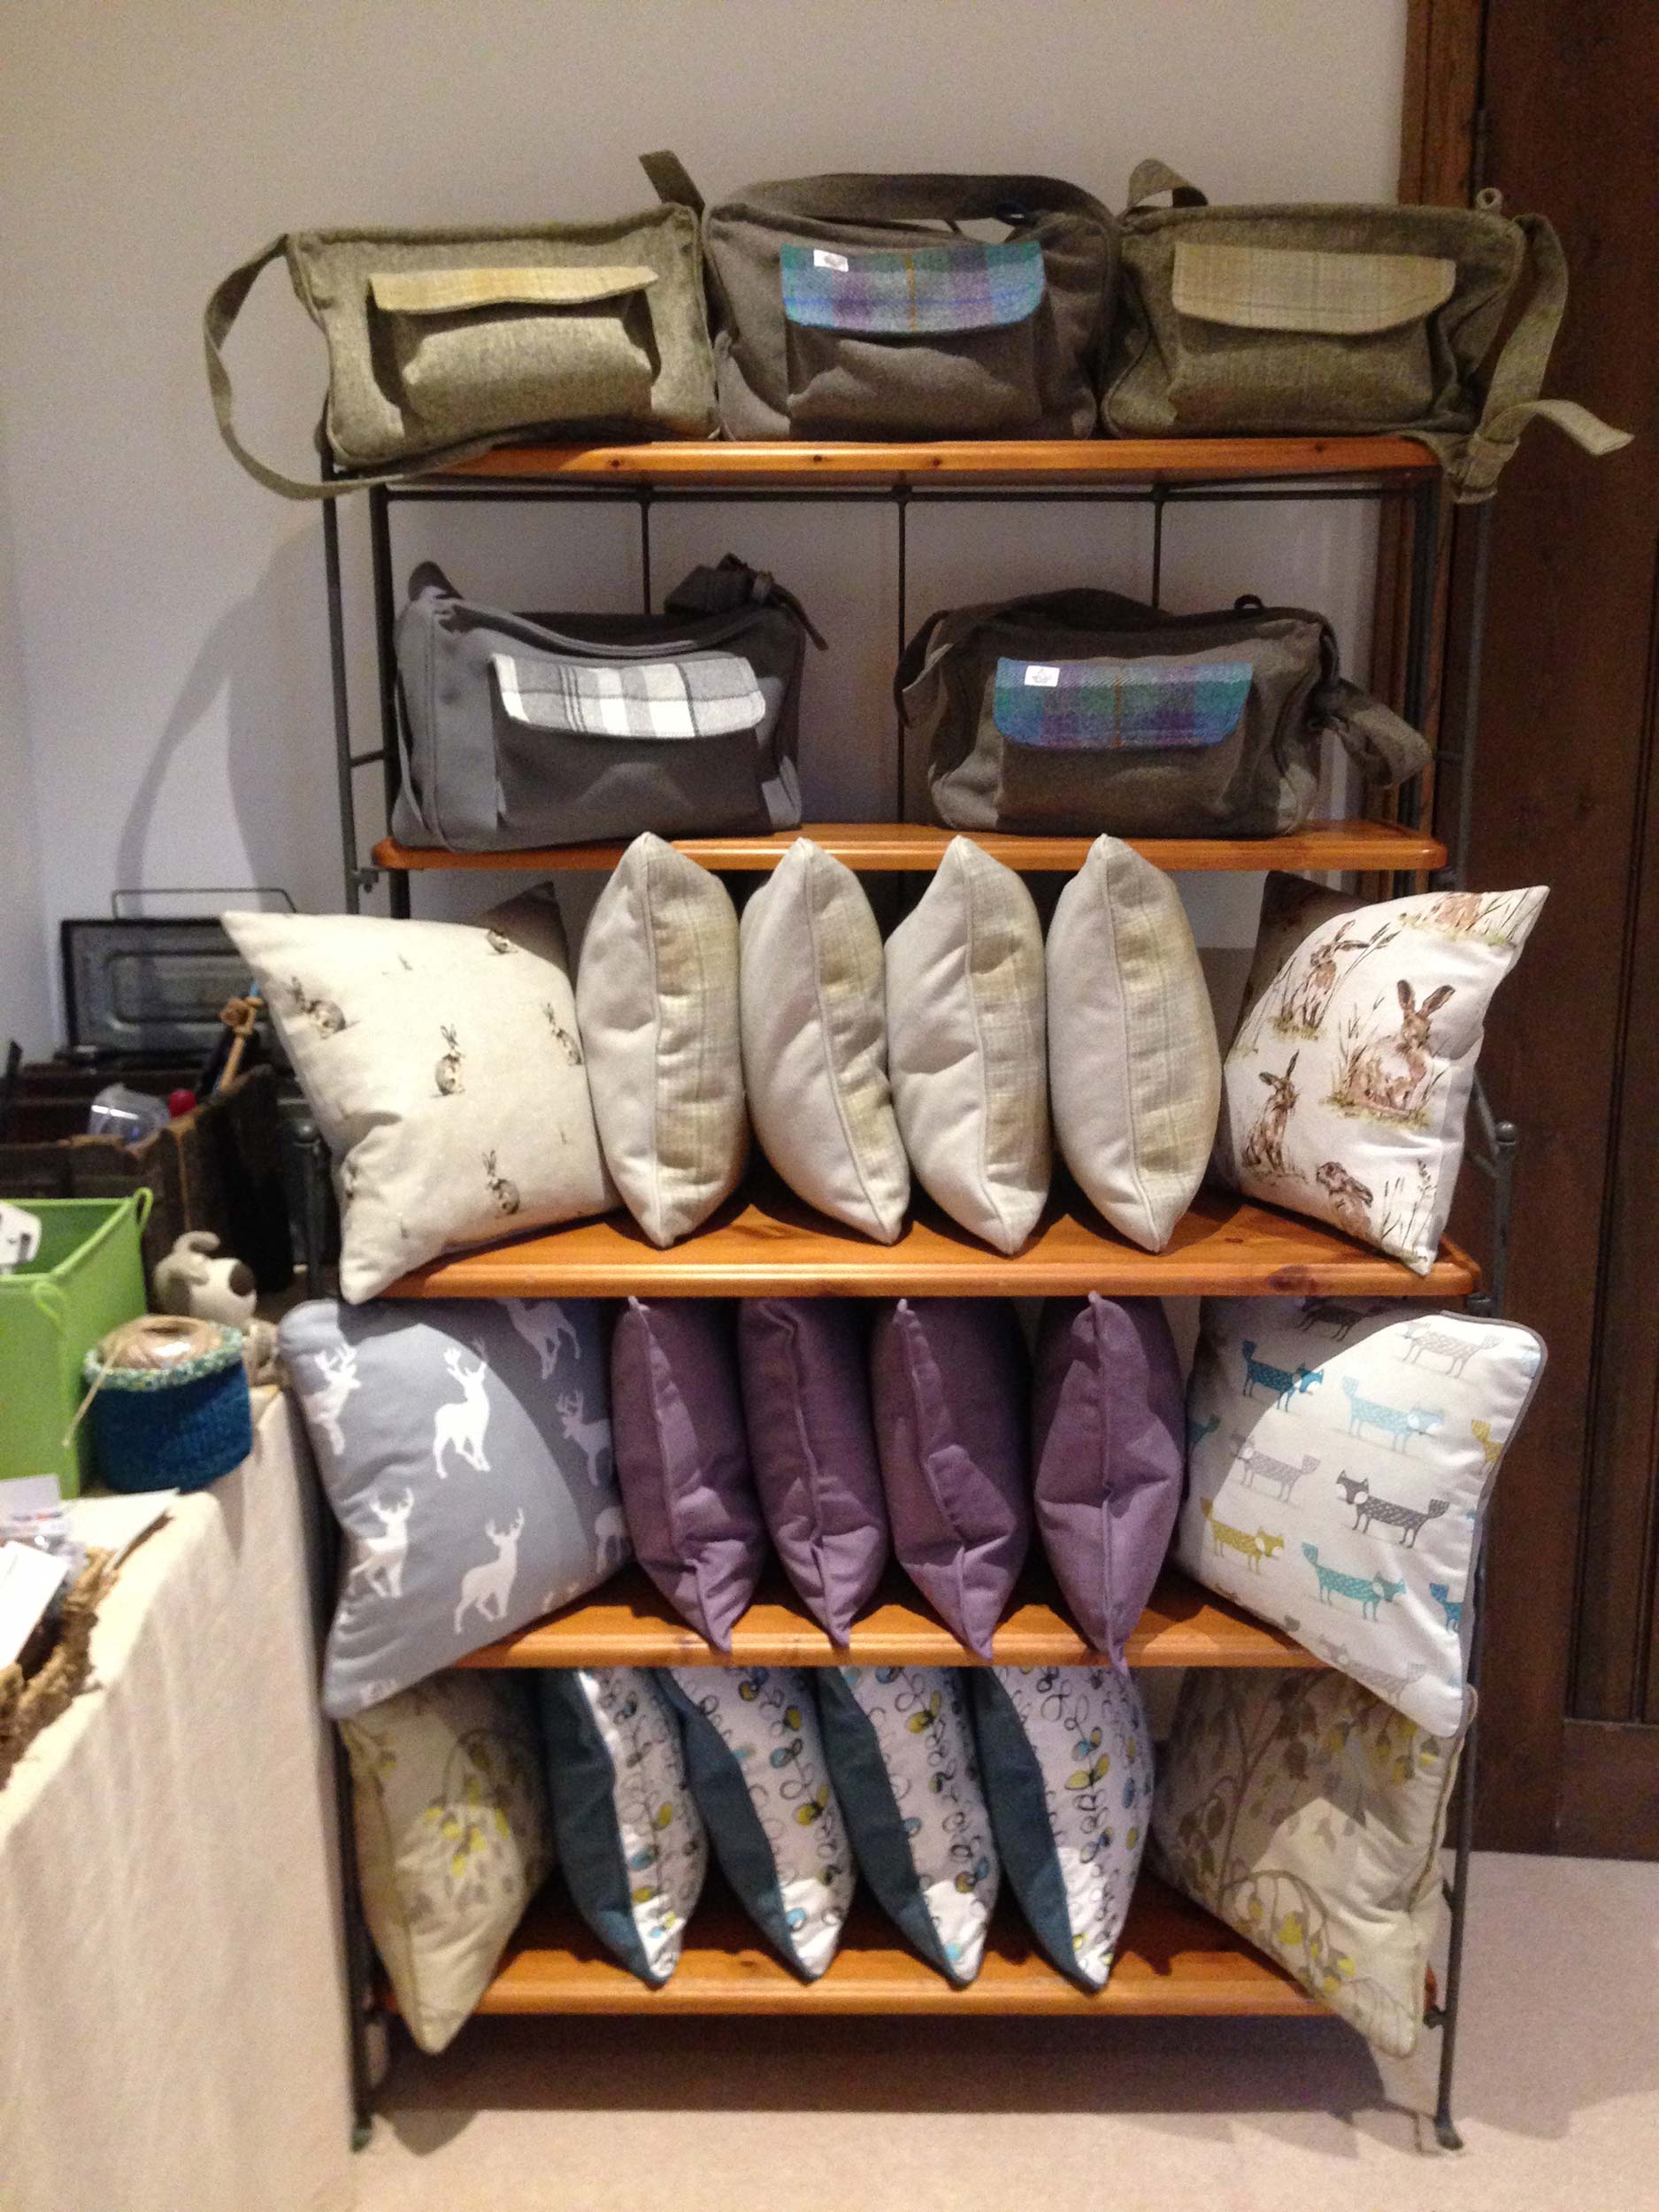 Home accessories & bags